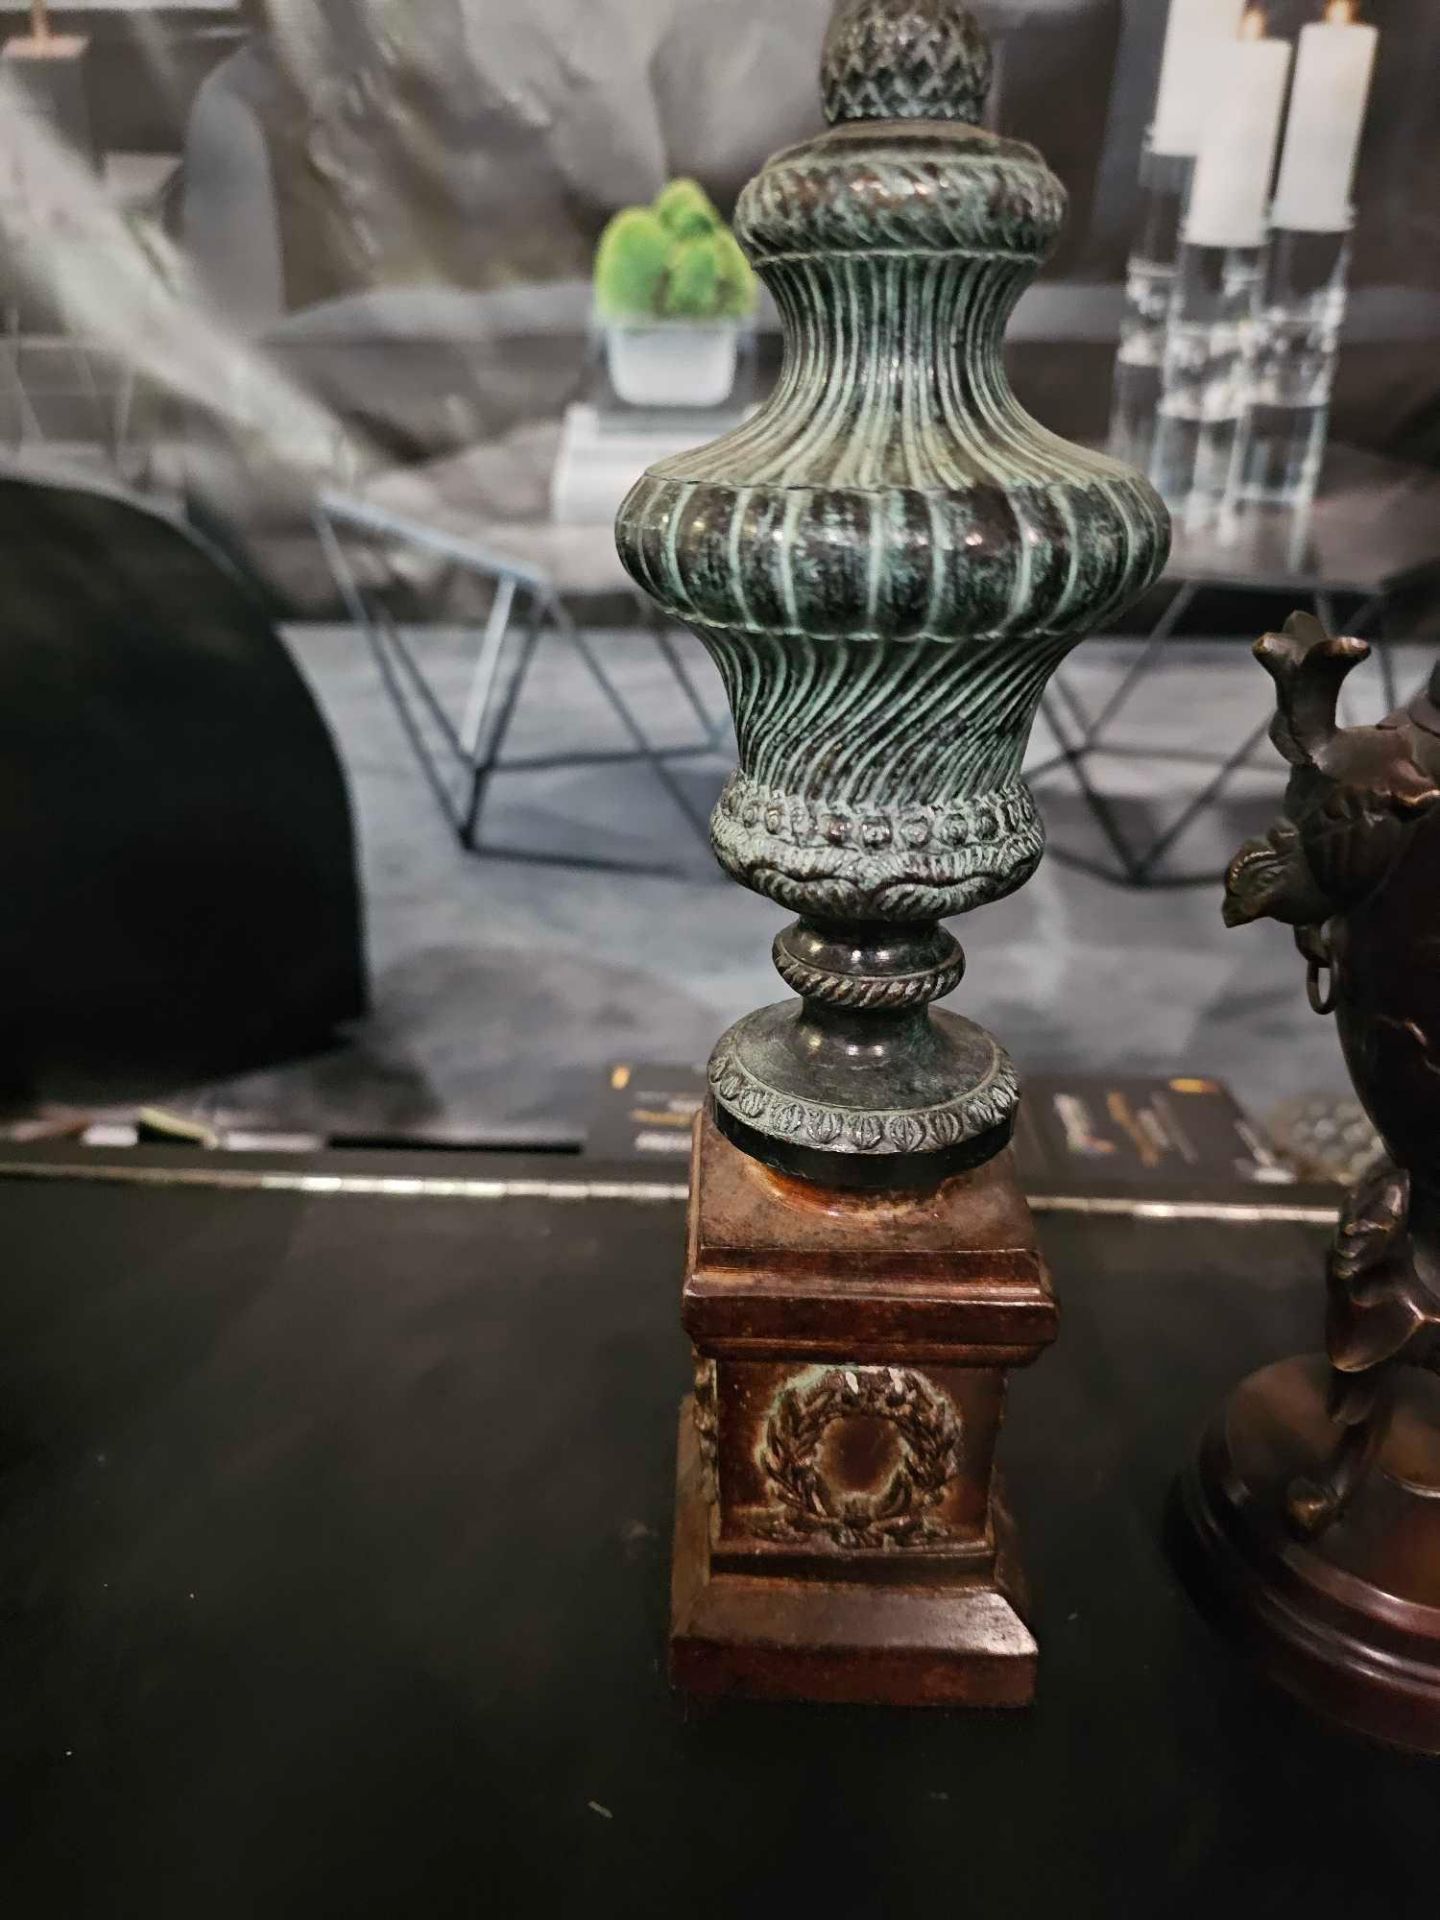 A Pair Of Decorative Empire Style Columns And A Bronzed Incense Vase - Image 3 of 4